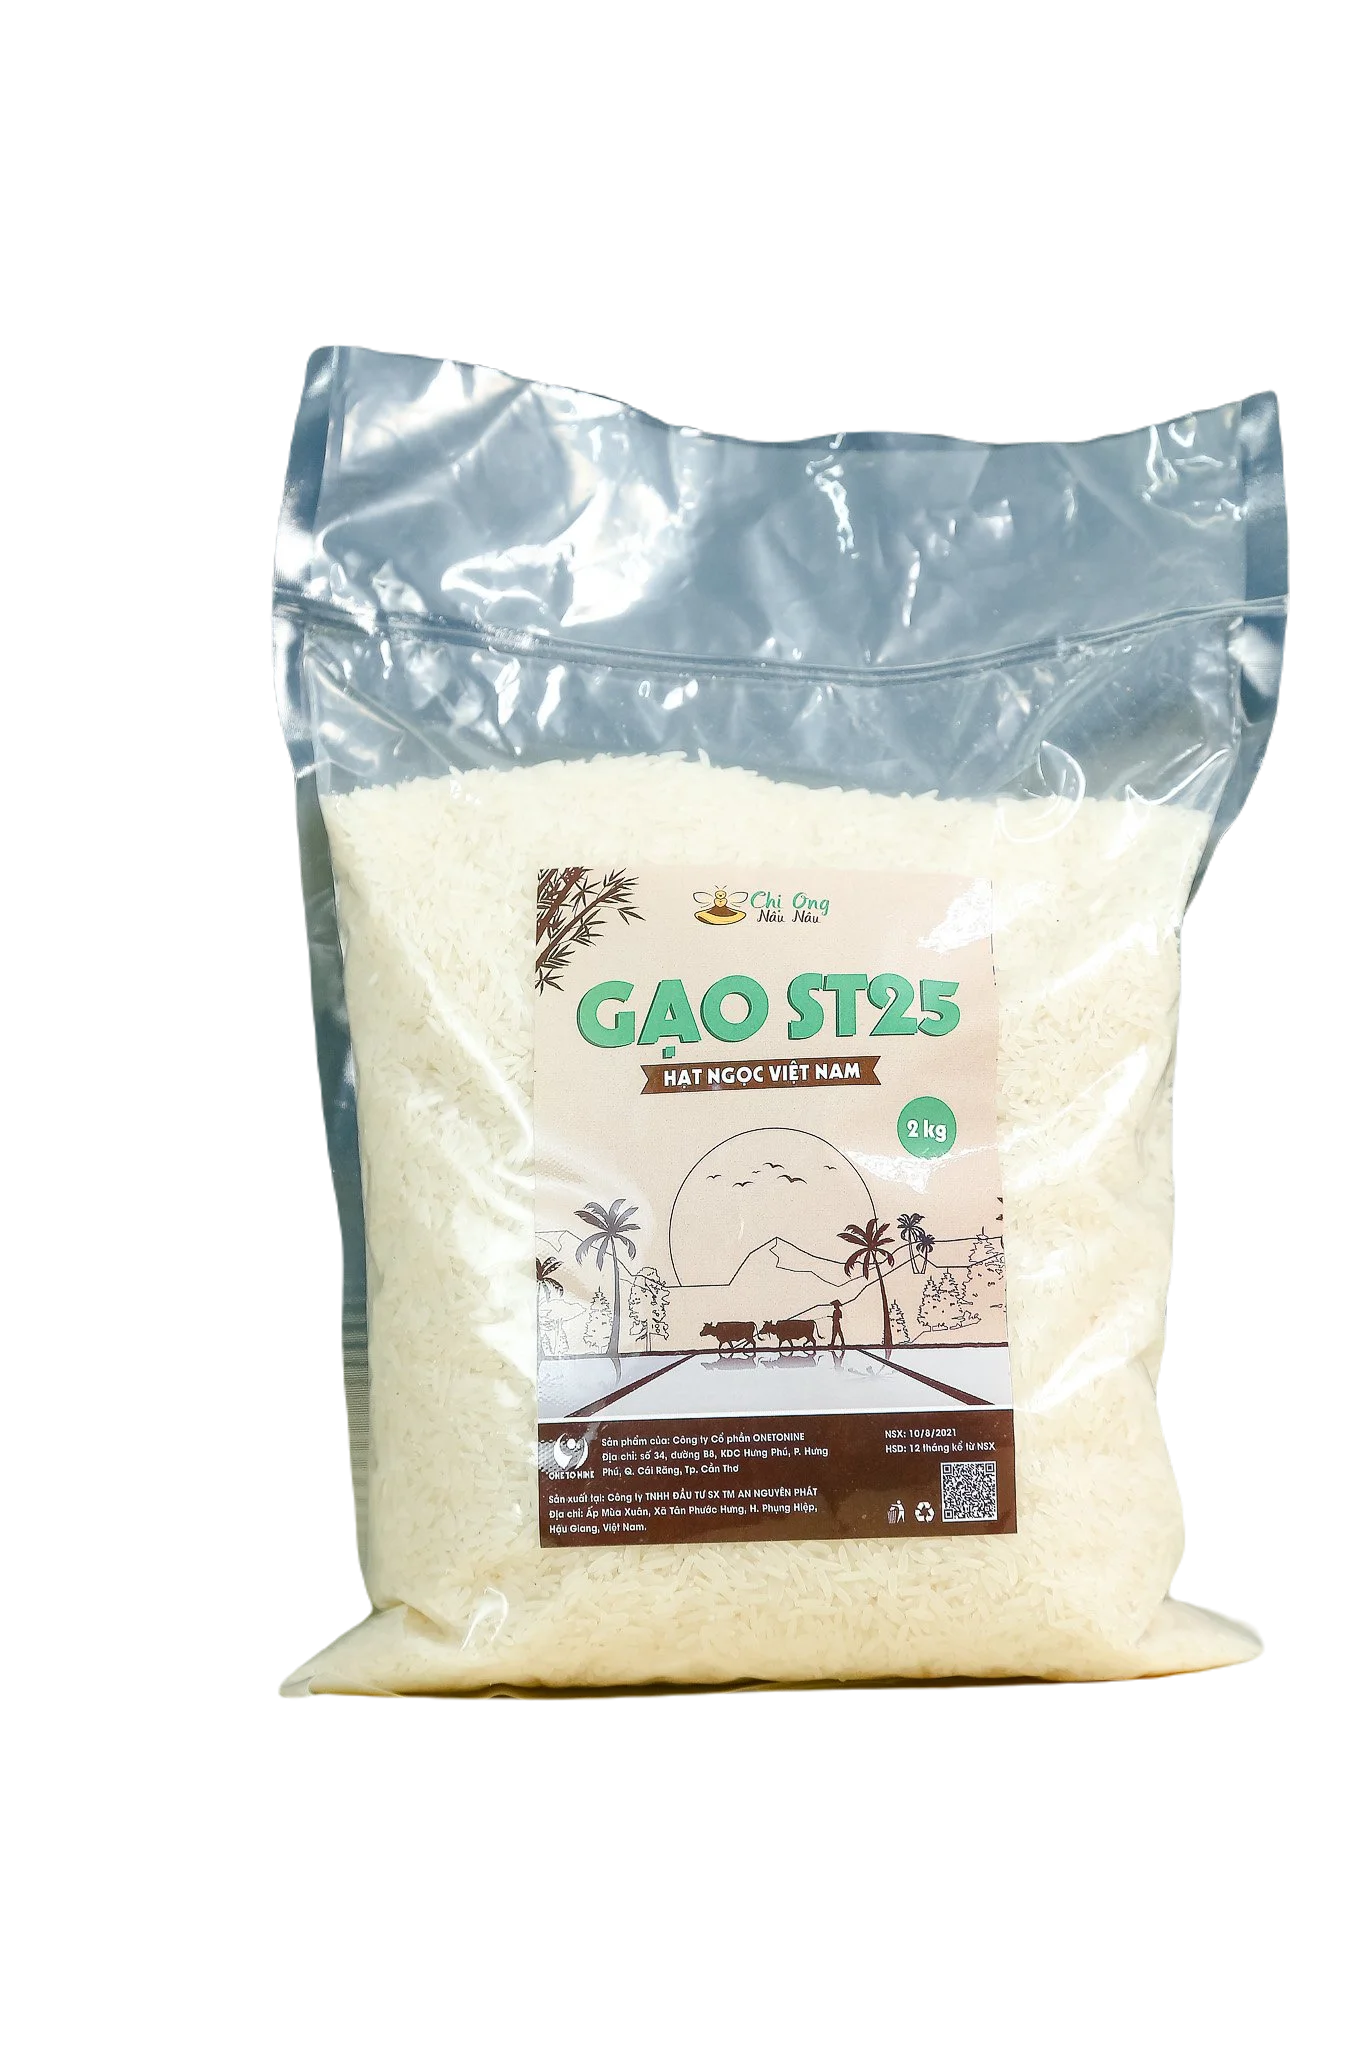 Quality ST 25 Rice Rice from India Max Soft White Crop Long Style Kind Color Origin Type Texture Variety Year Fresh Grain